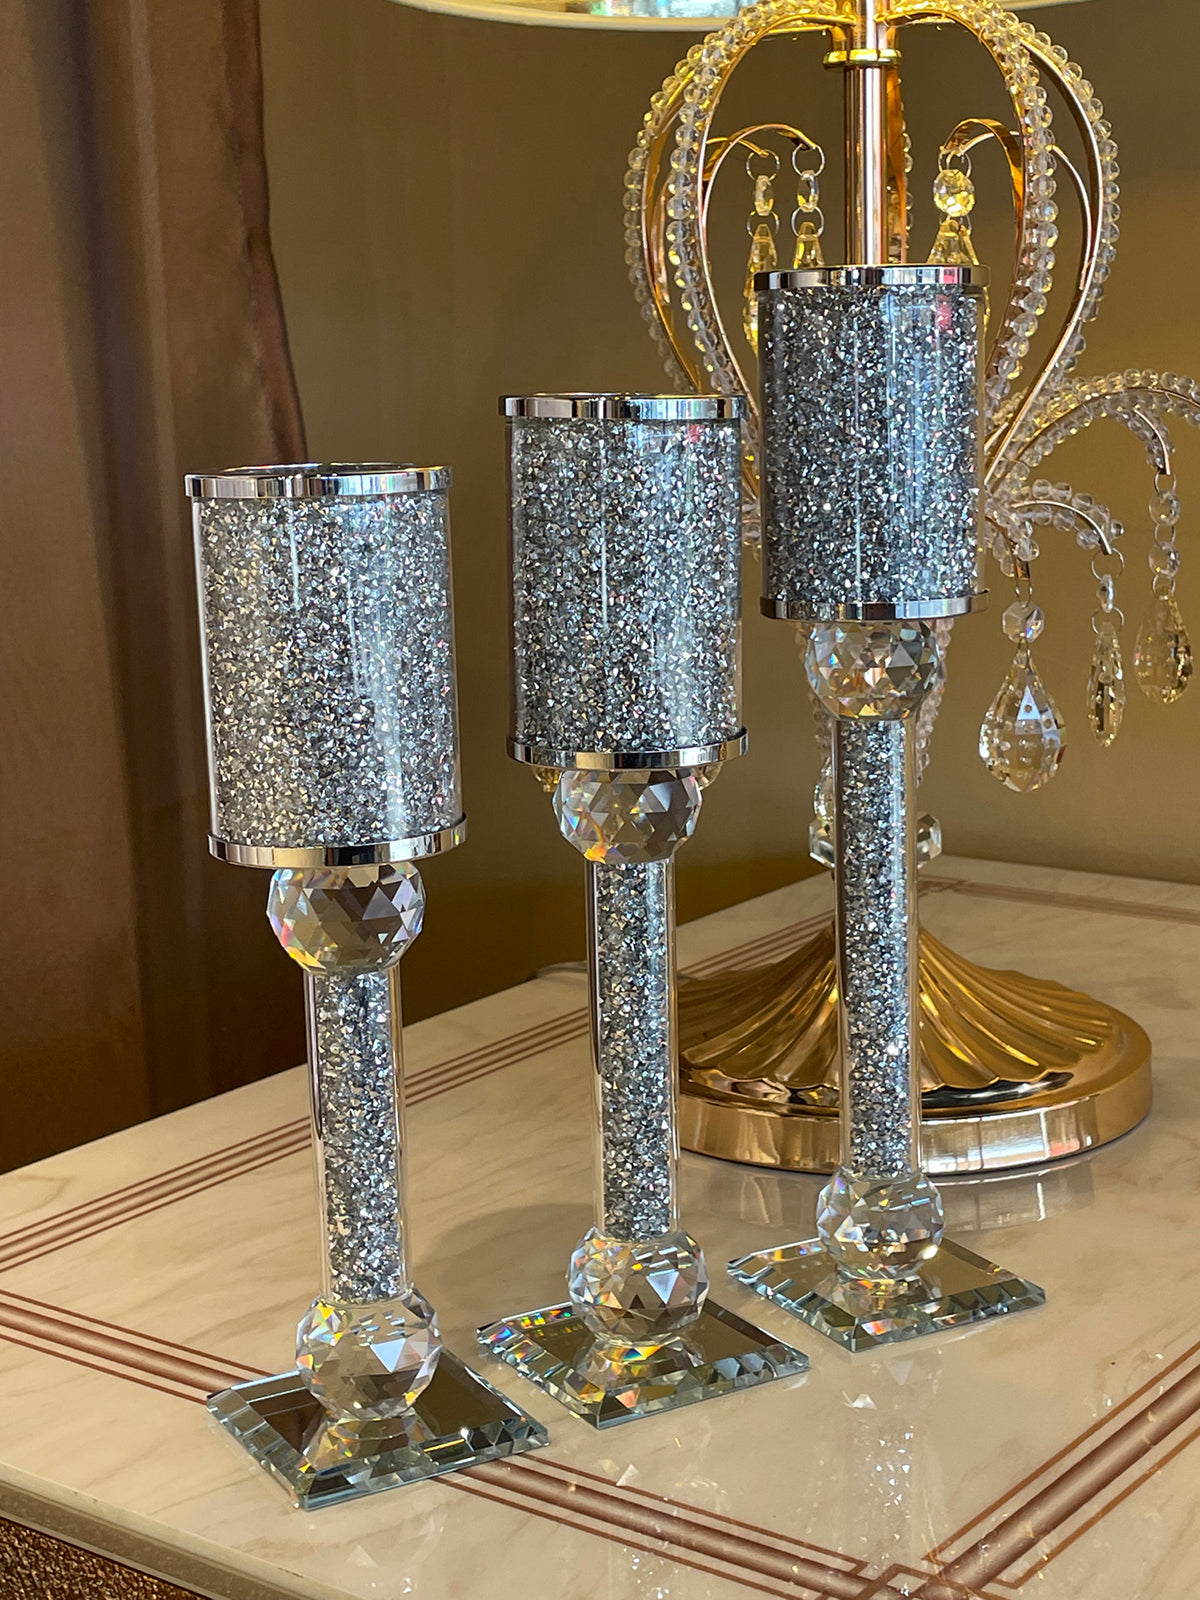 Ambrose Exquisite 3 Piece Candle Holder Set silver-glass